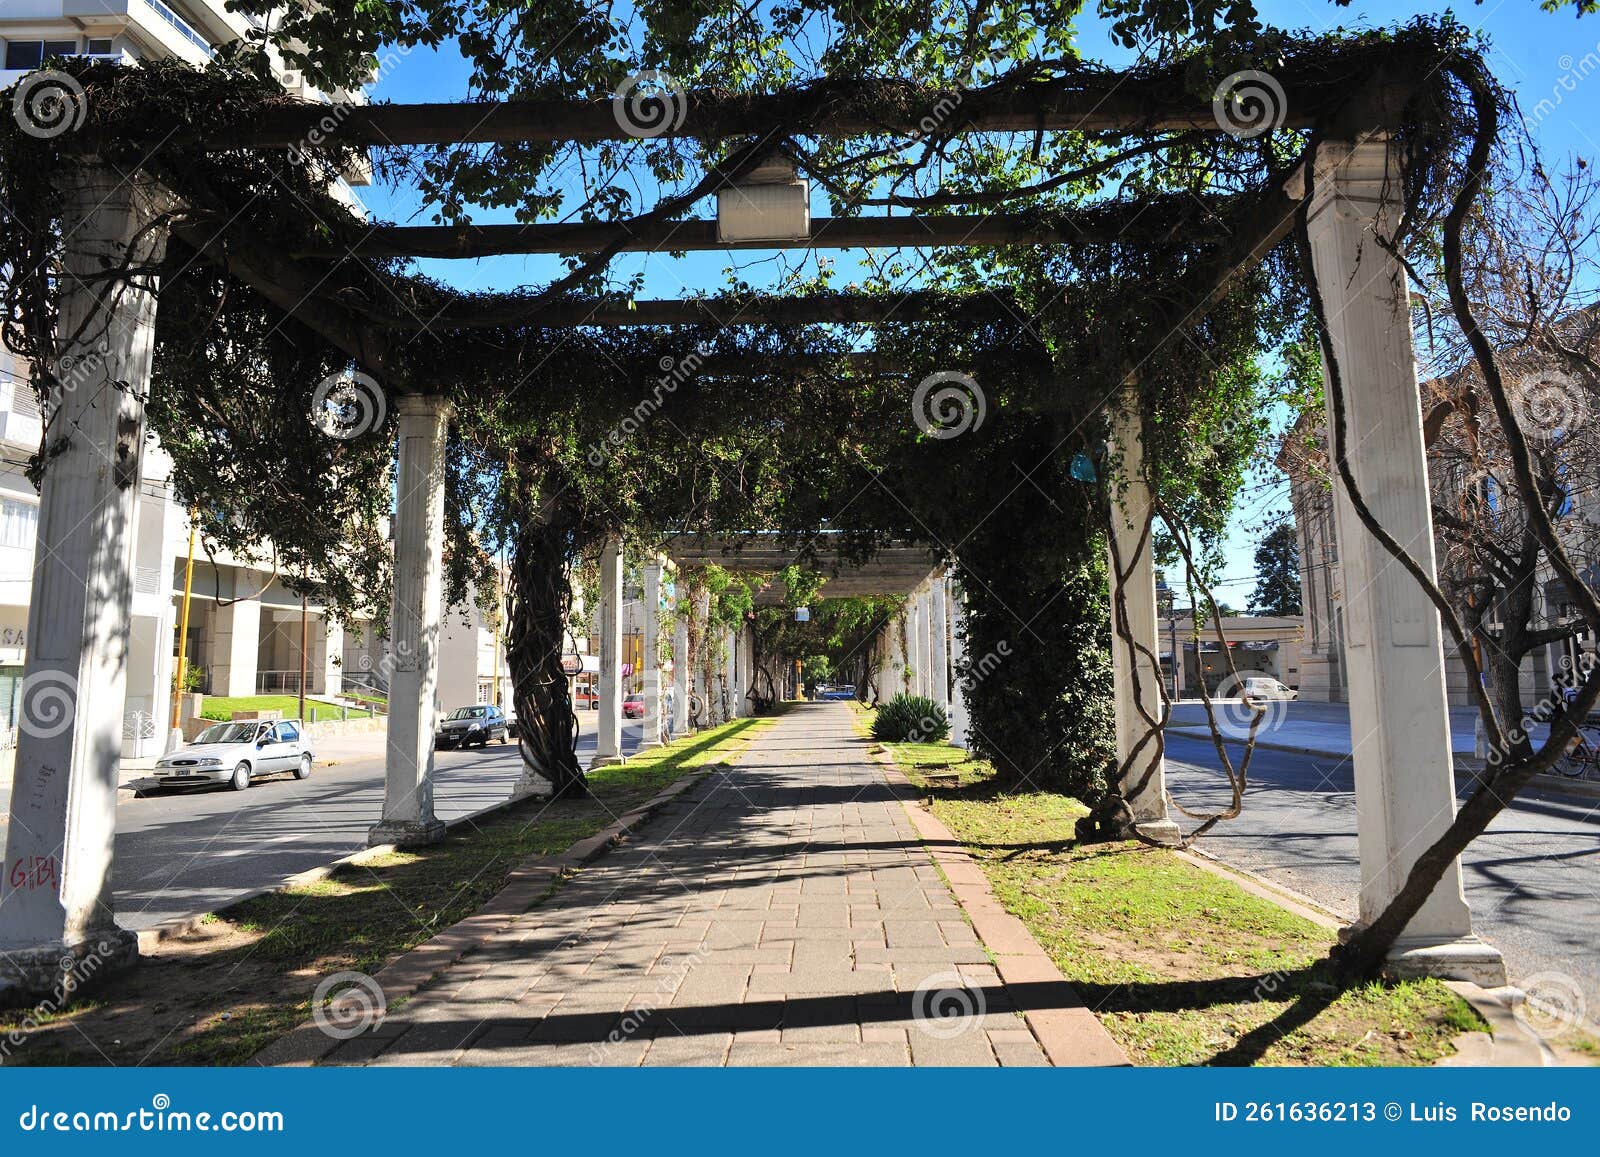 picturesque city with a boulevard with trees santa fe argentina